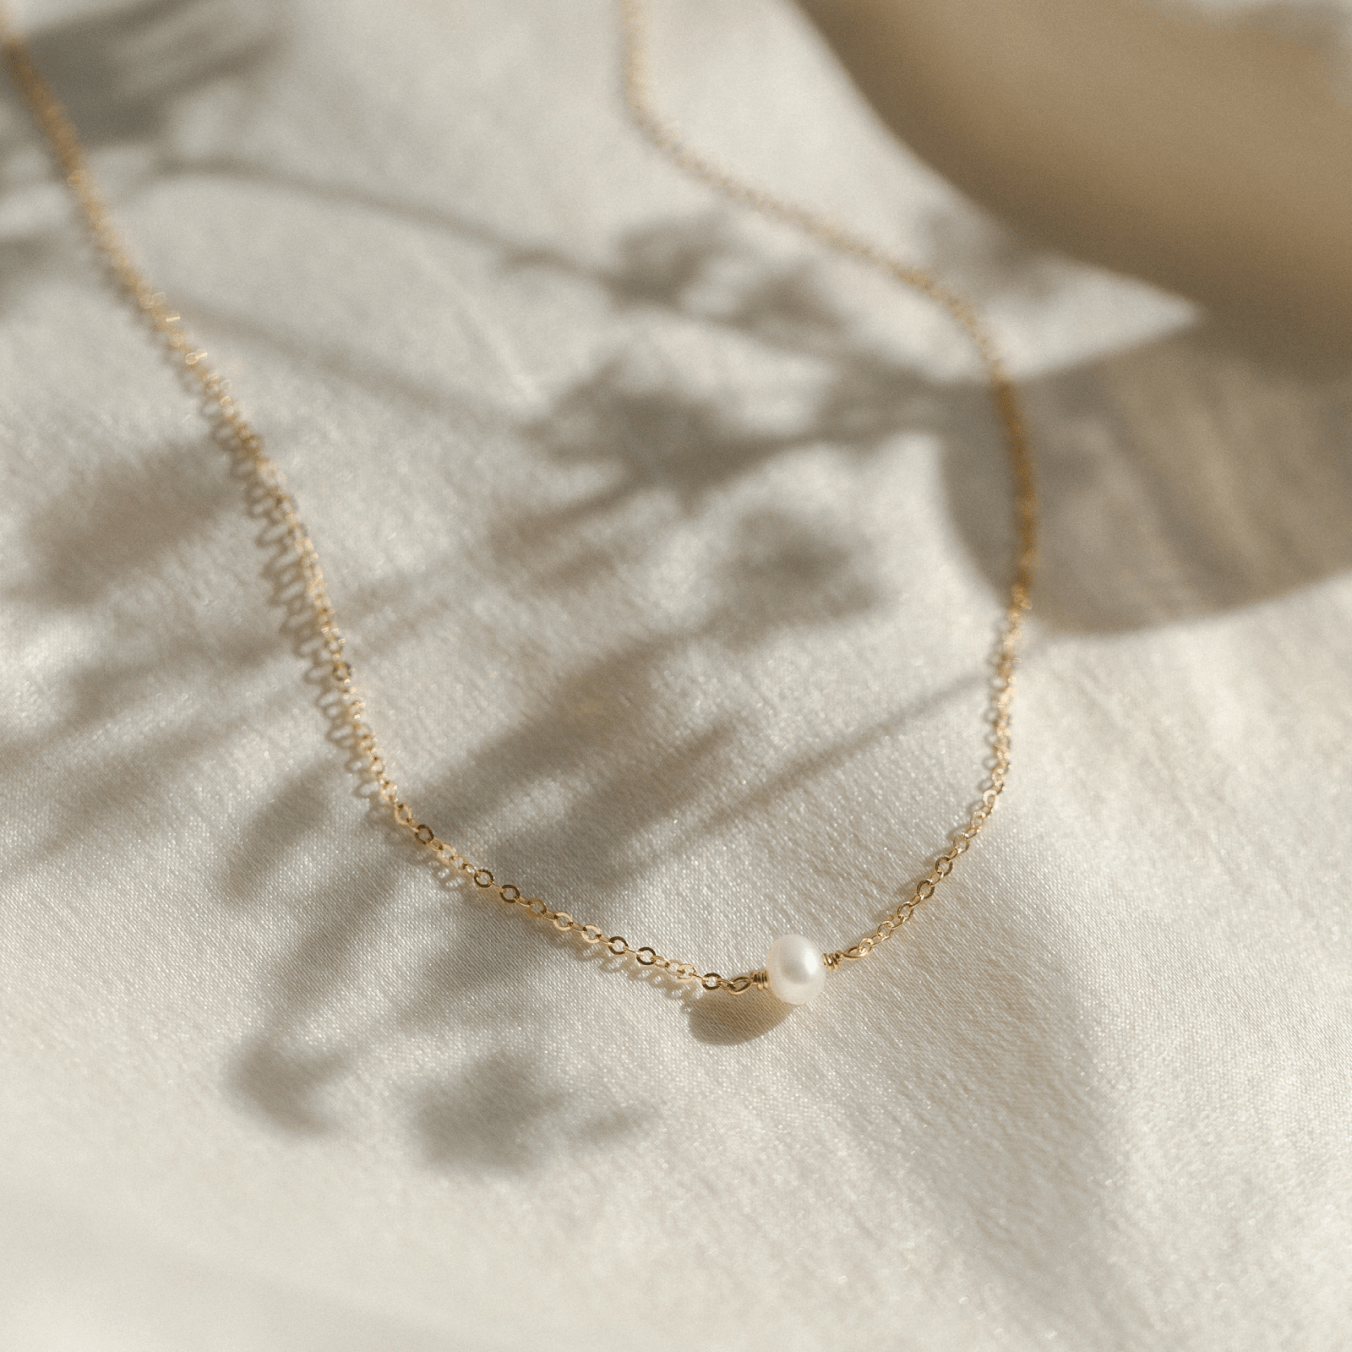 GLDN Pleine Lune Necklace Rose Gold Fill / Large Pearl